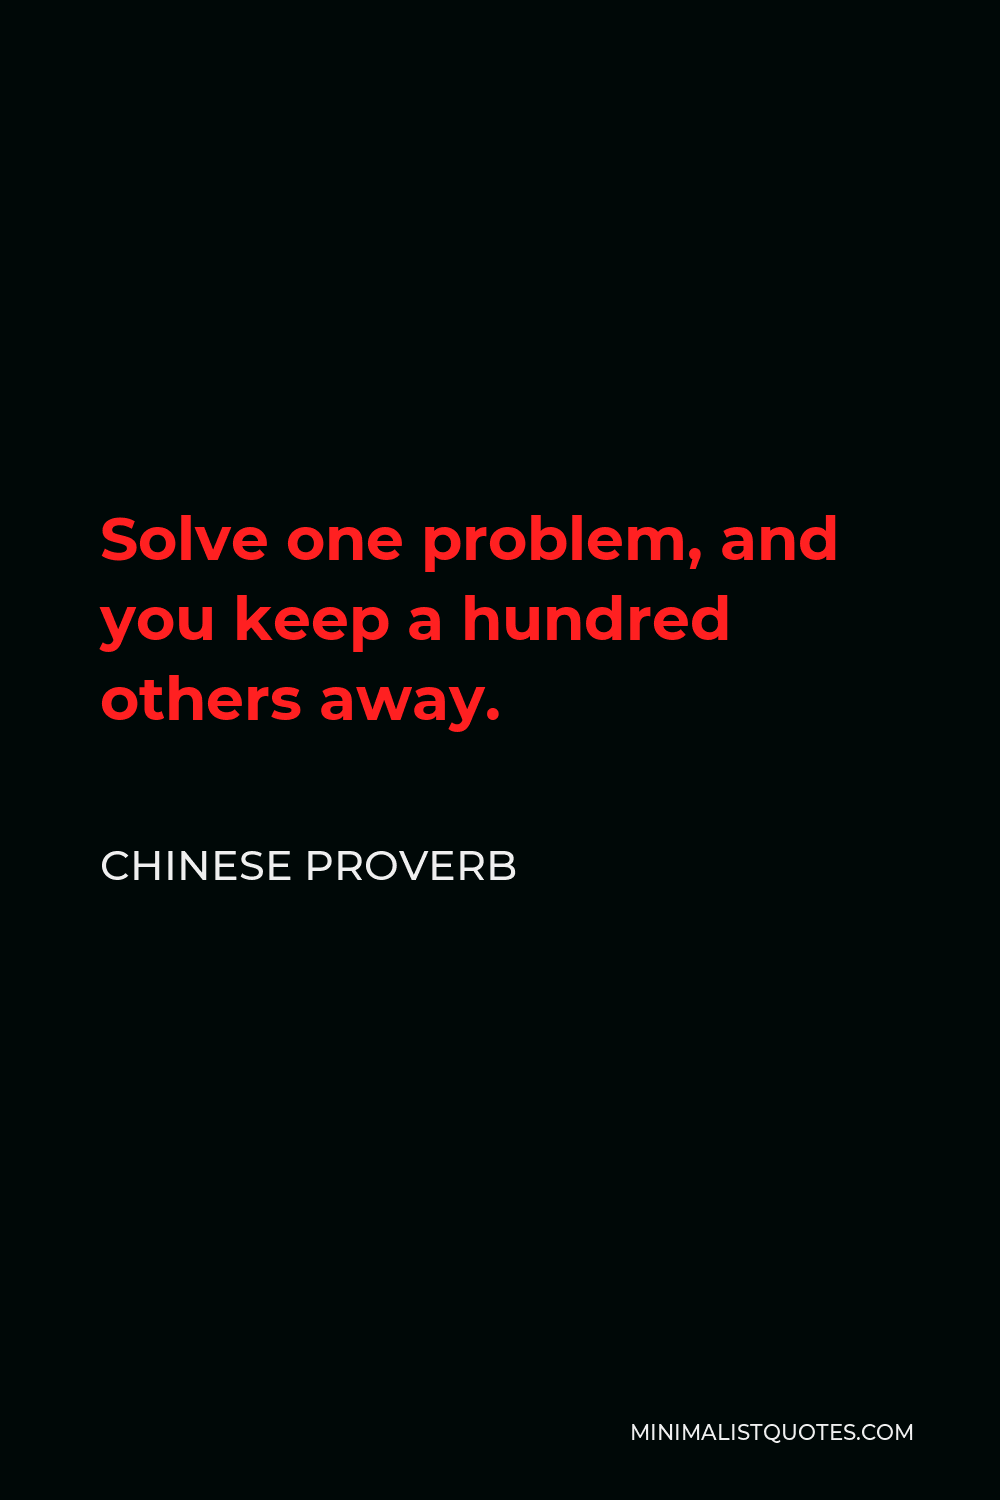 Chinese Proverb Quote - Solve one problem, and you keep a hundred others away.